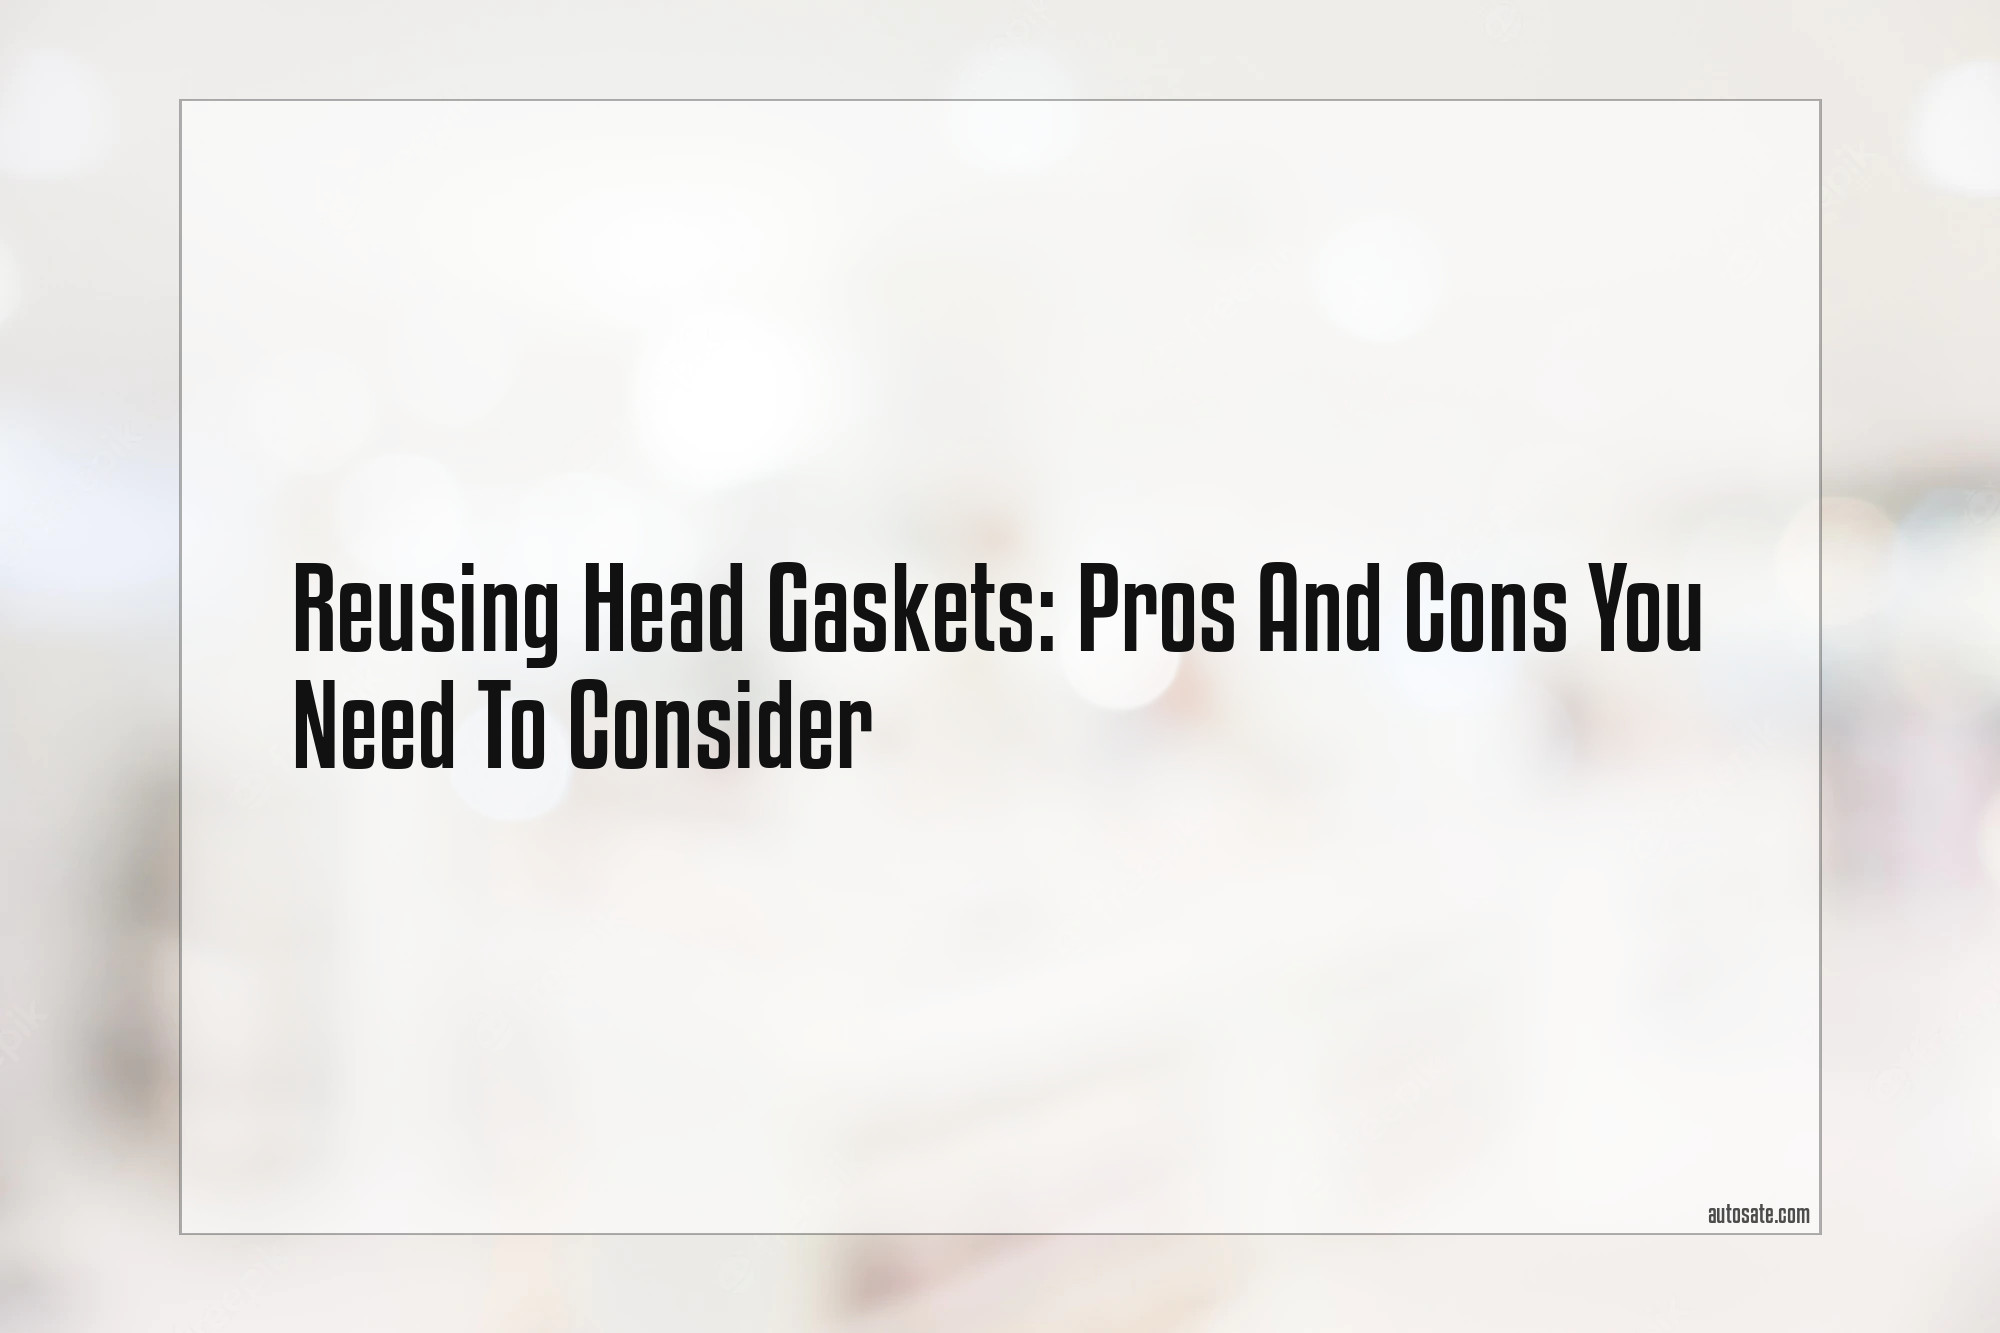 Reusing Head Gaskets: Pros And Cons You Need To Consider